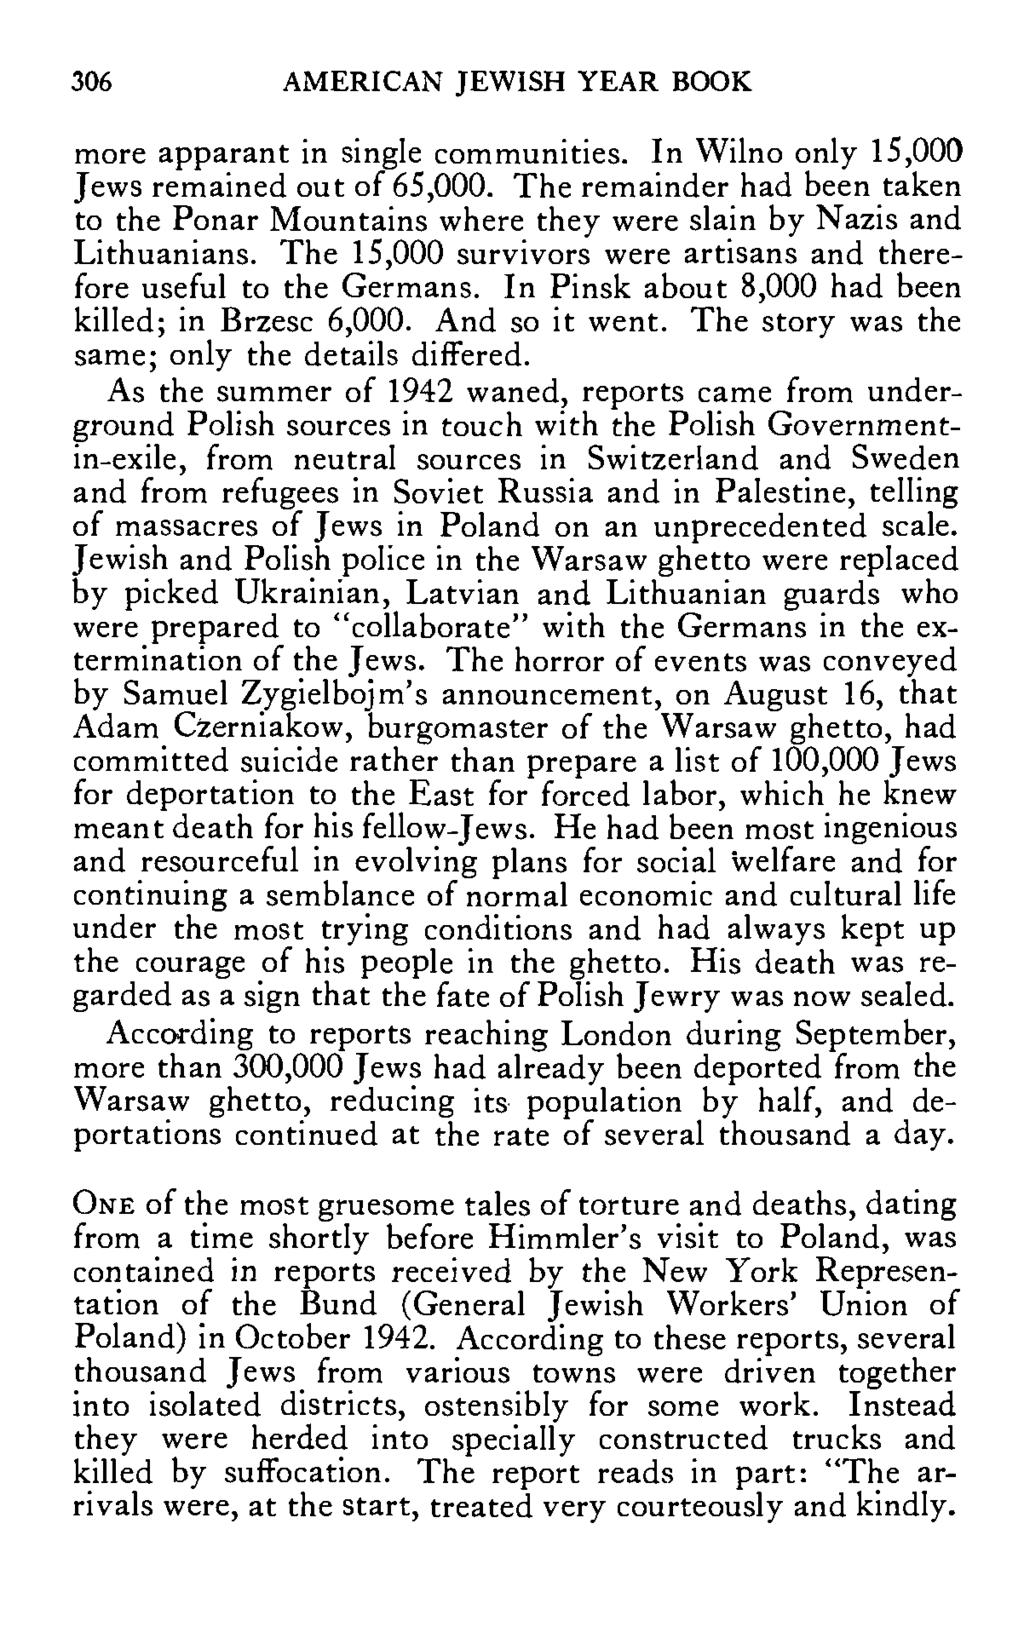 306 AMERICAN JEWISH YEAR BOOK more apparant in single communities. In Wilno only 15,000 Jews remained out of 65,000.